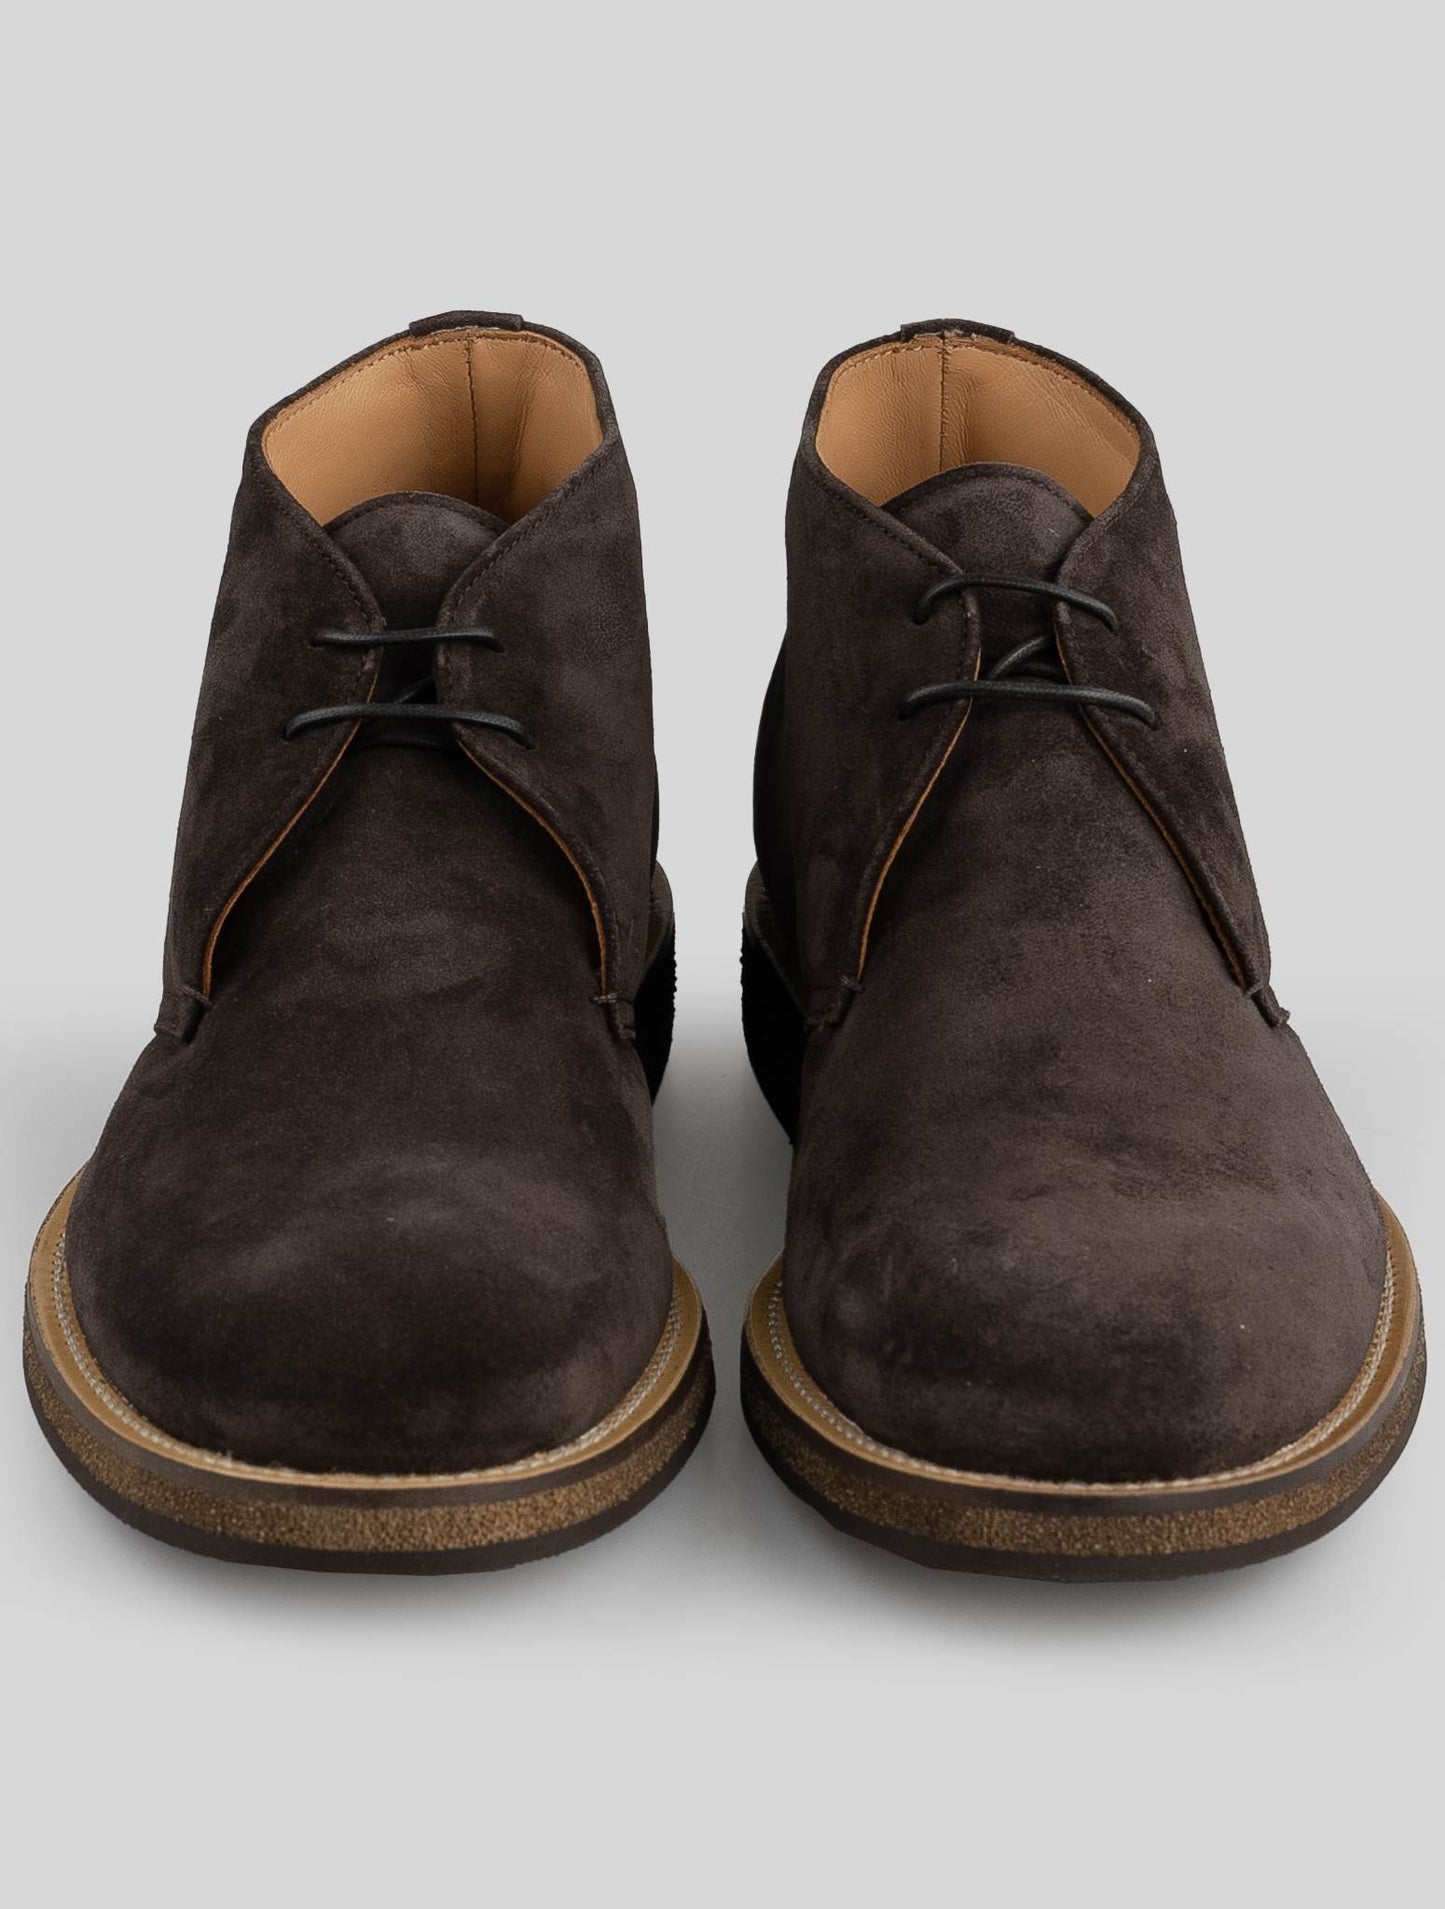 Kiton Brown Leather Suede Boots